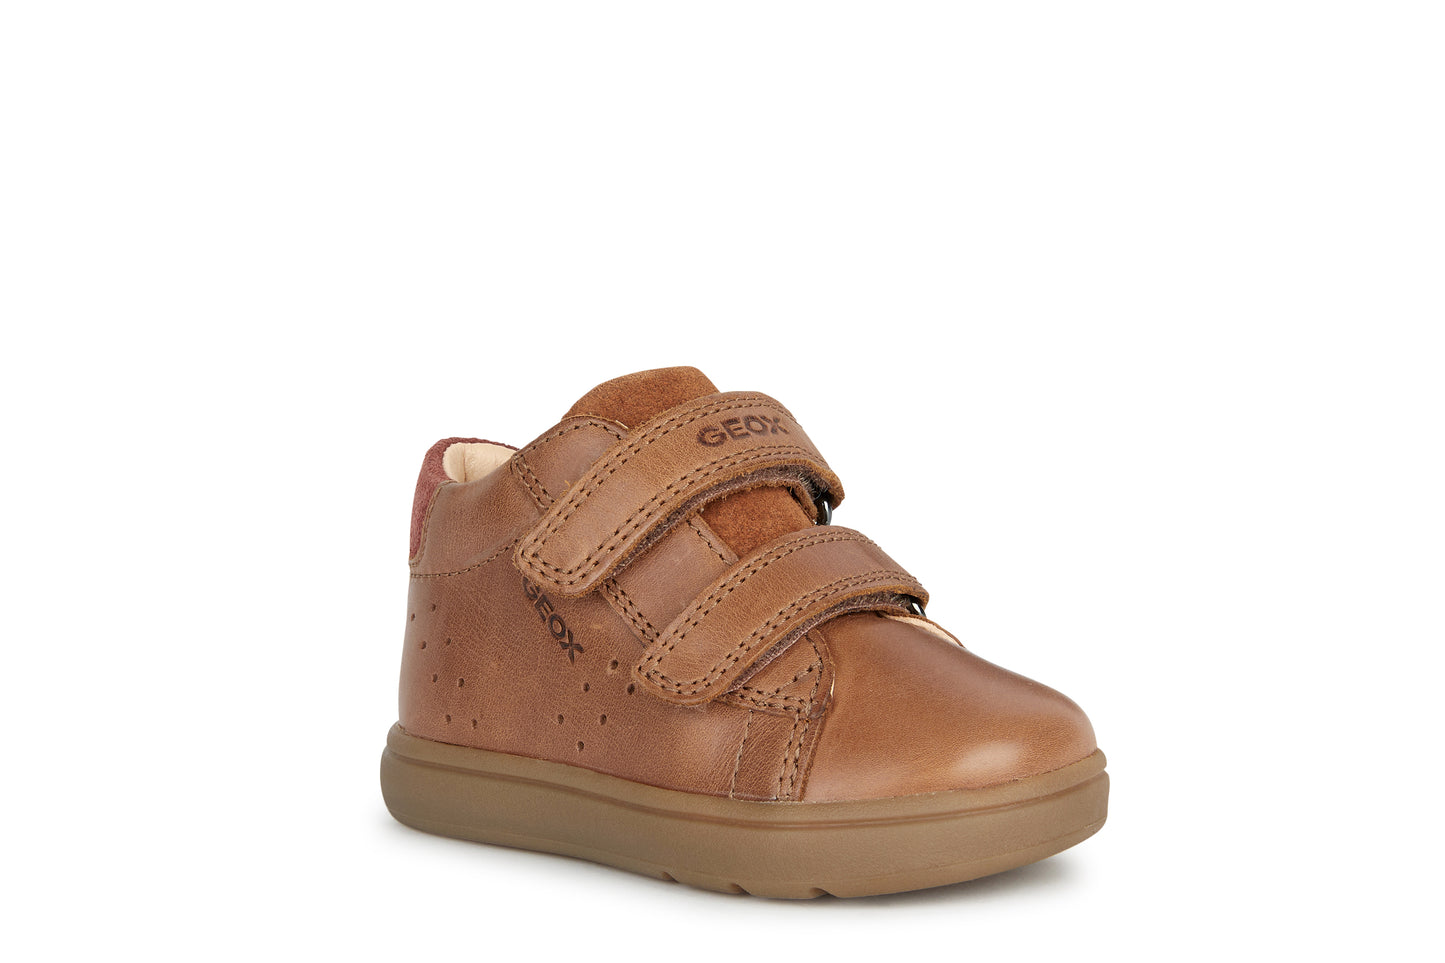 Biglia Baby Boy's Cognac Brown Waxed Leather and Suede Shoe